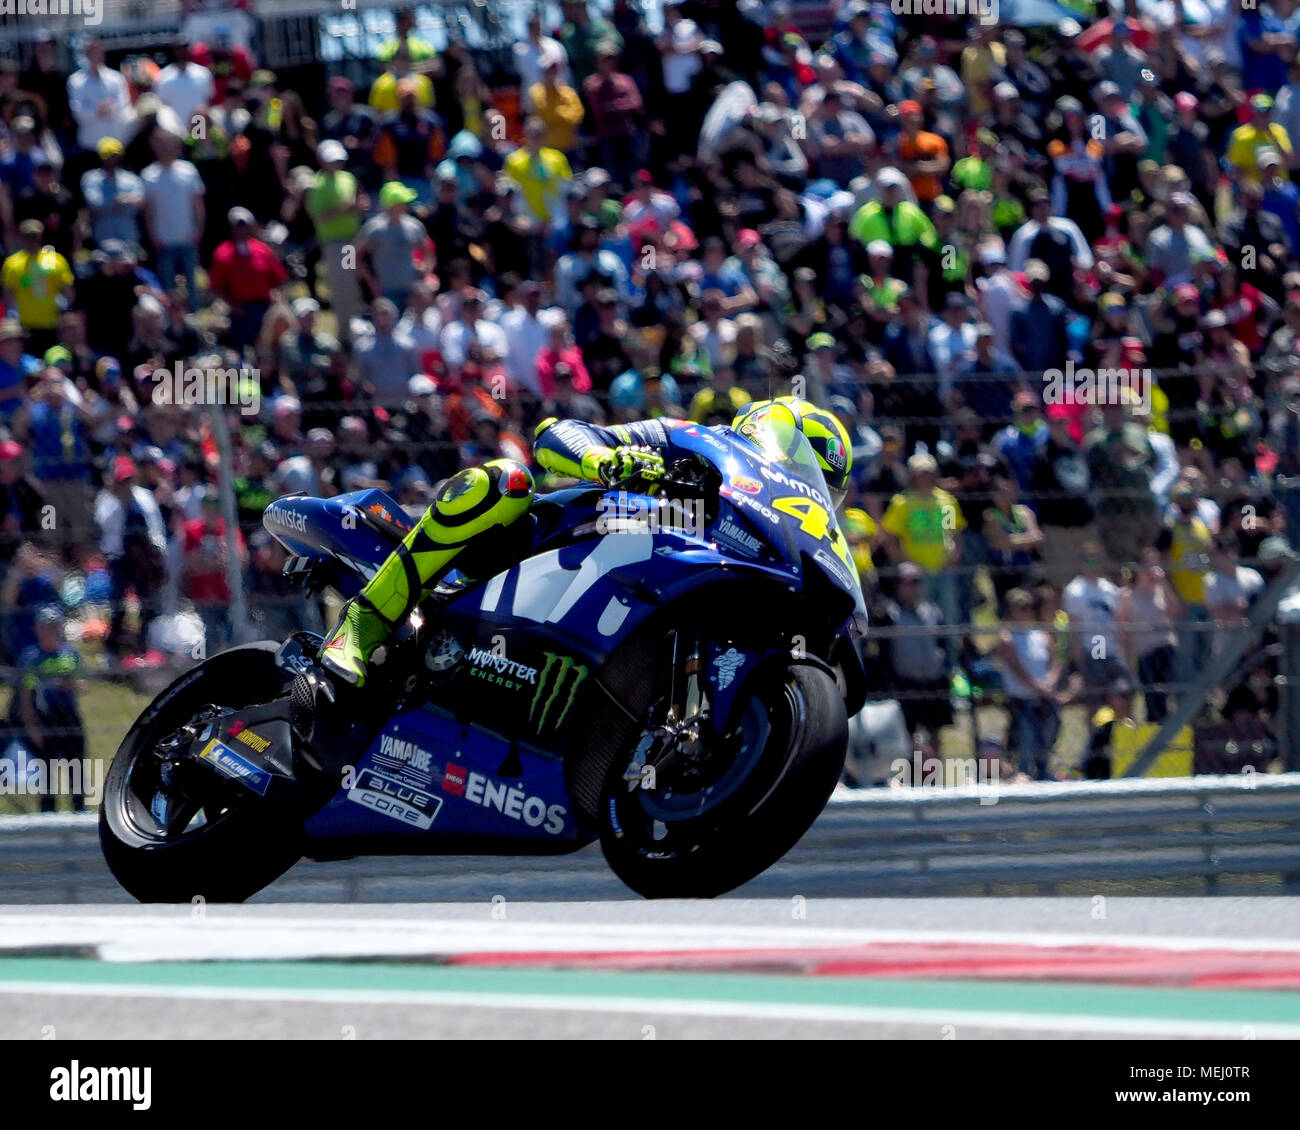 April 22, 2018. Valentino Rossi #46 of Movistar Yamaha MotoGP in action  during the MotoGP at the Circuit of the Americas in Austin Texas.Robert  Backman/Cal Sport Media Stock Photo - Alamy